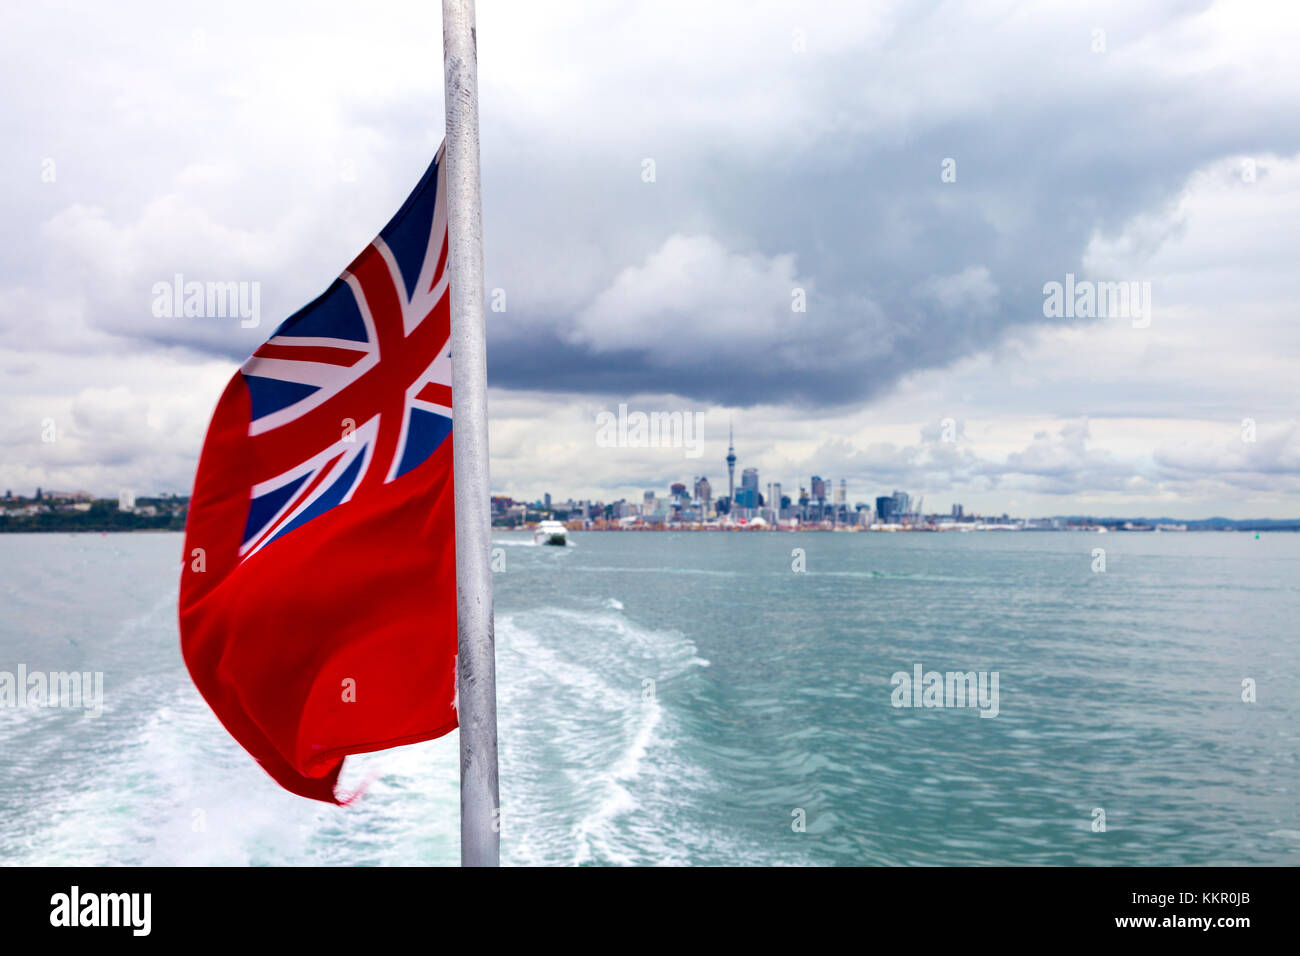 Red ensign flag at the stern of a boat waving in the wind with skyline of Auckland in the background, New Zealand Stock Photo